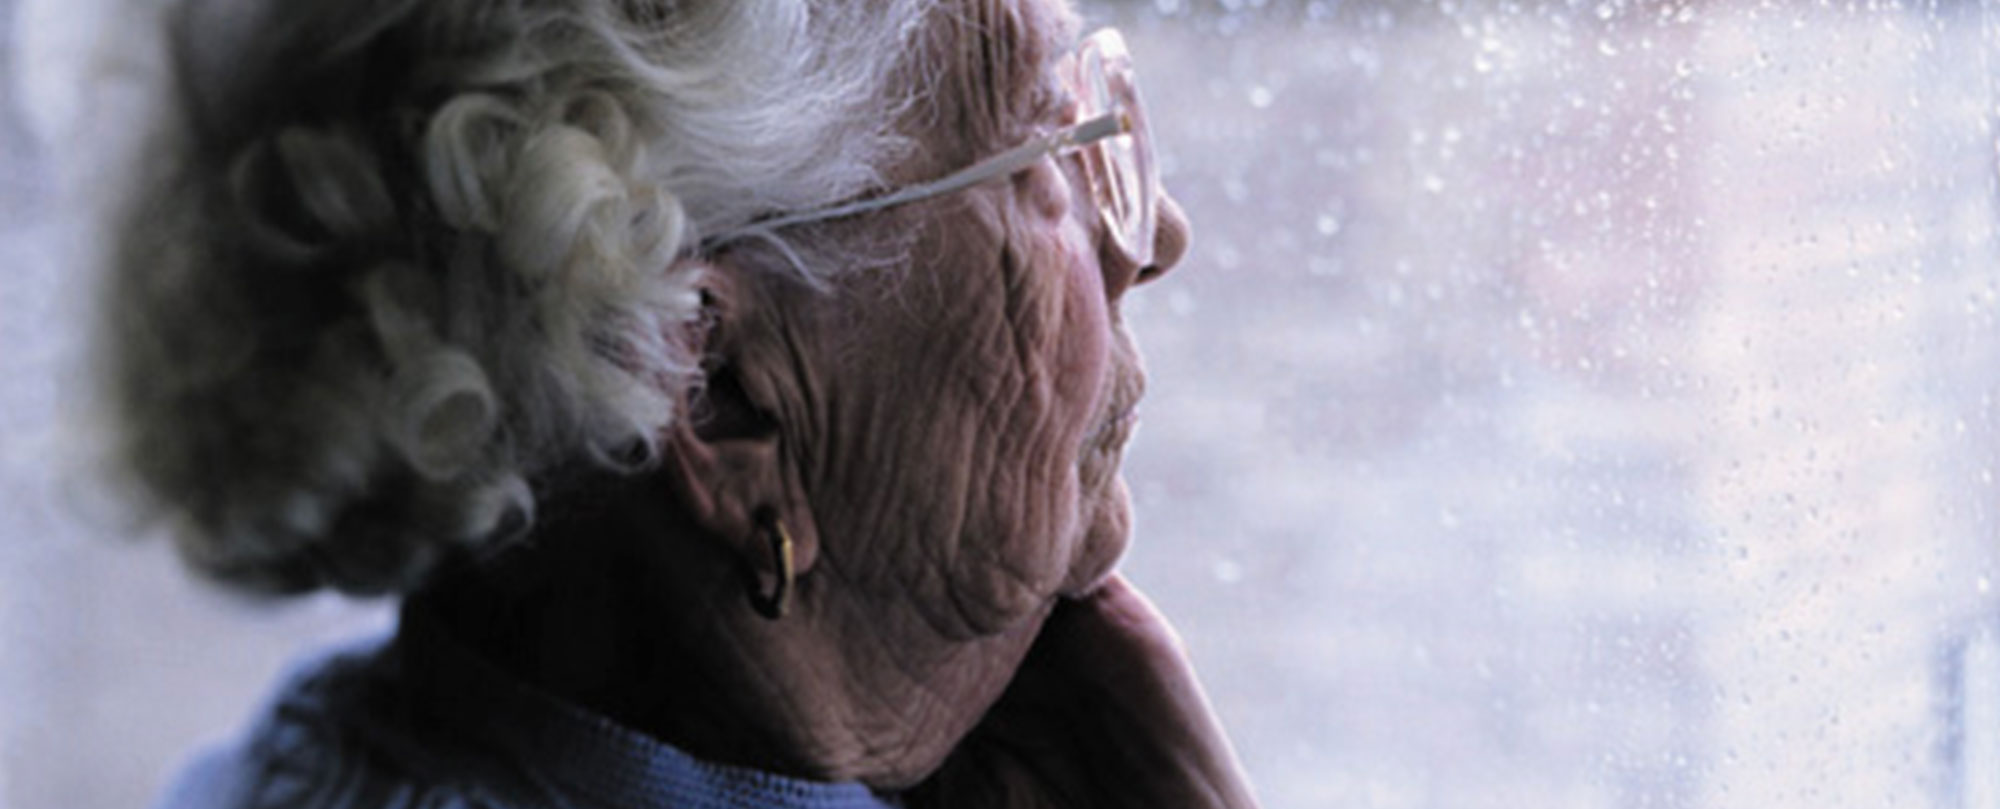 Elderly woman looking through window worried about nursing home care